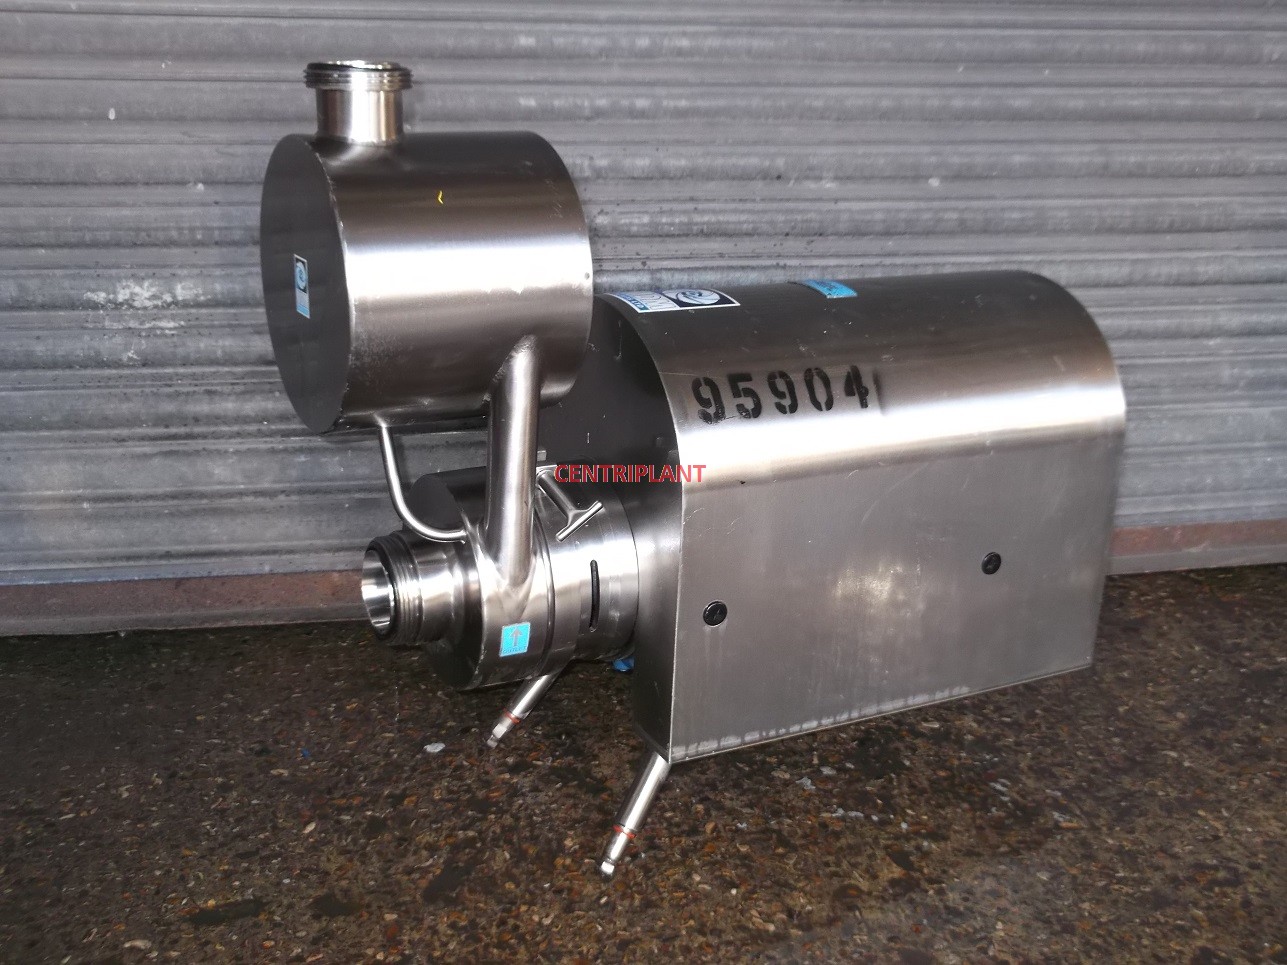 95904 - MDM STAINLESS STEEL PUMP WITH AIR ELIMINATOR, MODEL 65 H 161/8/7.5 KW, 3 in  RJT INLET, 2.5in  RJT OUTLE